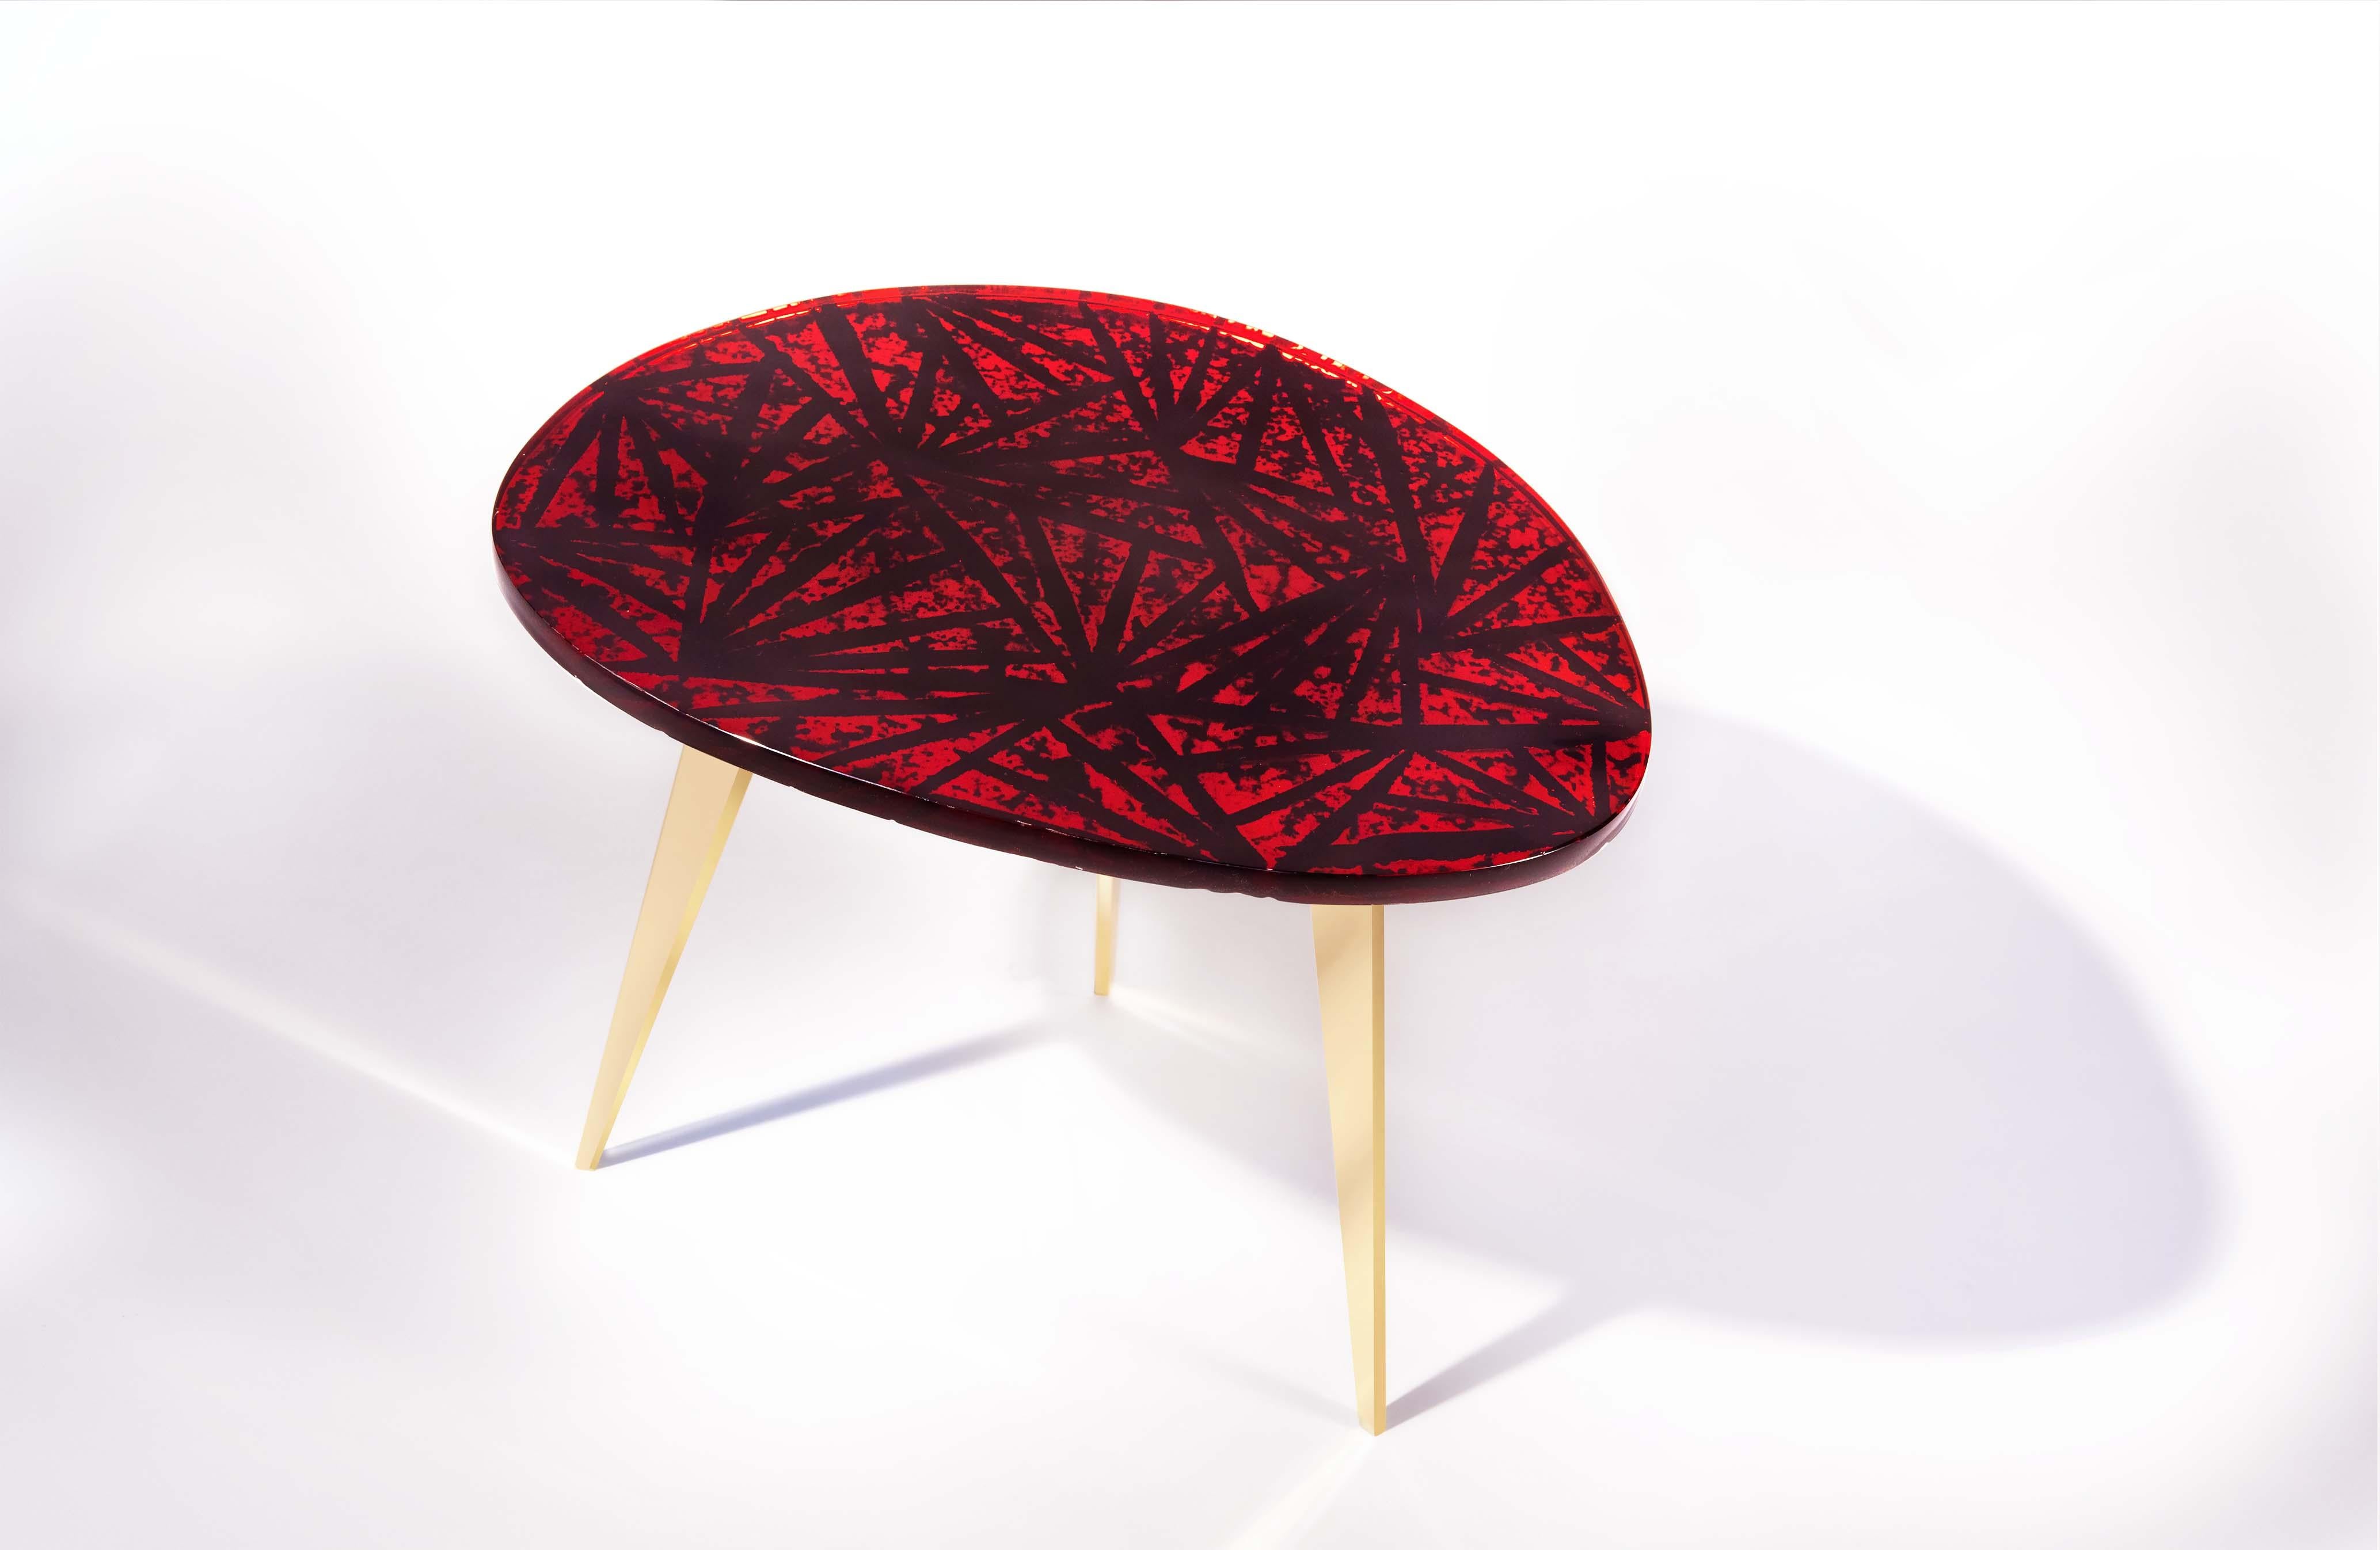 Collection 2021 of coffee tables by Ghirò Studio.
The entire support structure is made of brass. The underplate is matt black while the three legs have a polished brass finish. The crystal has an intense red color similar to that of a ruby. The